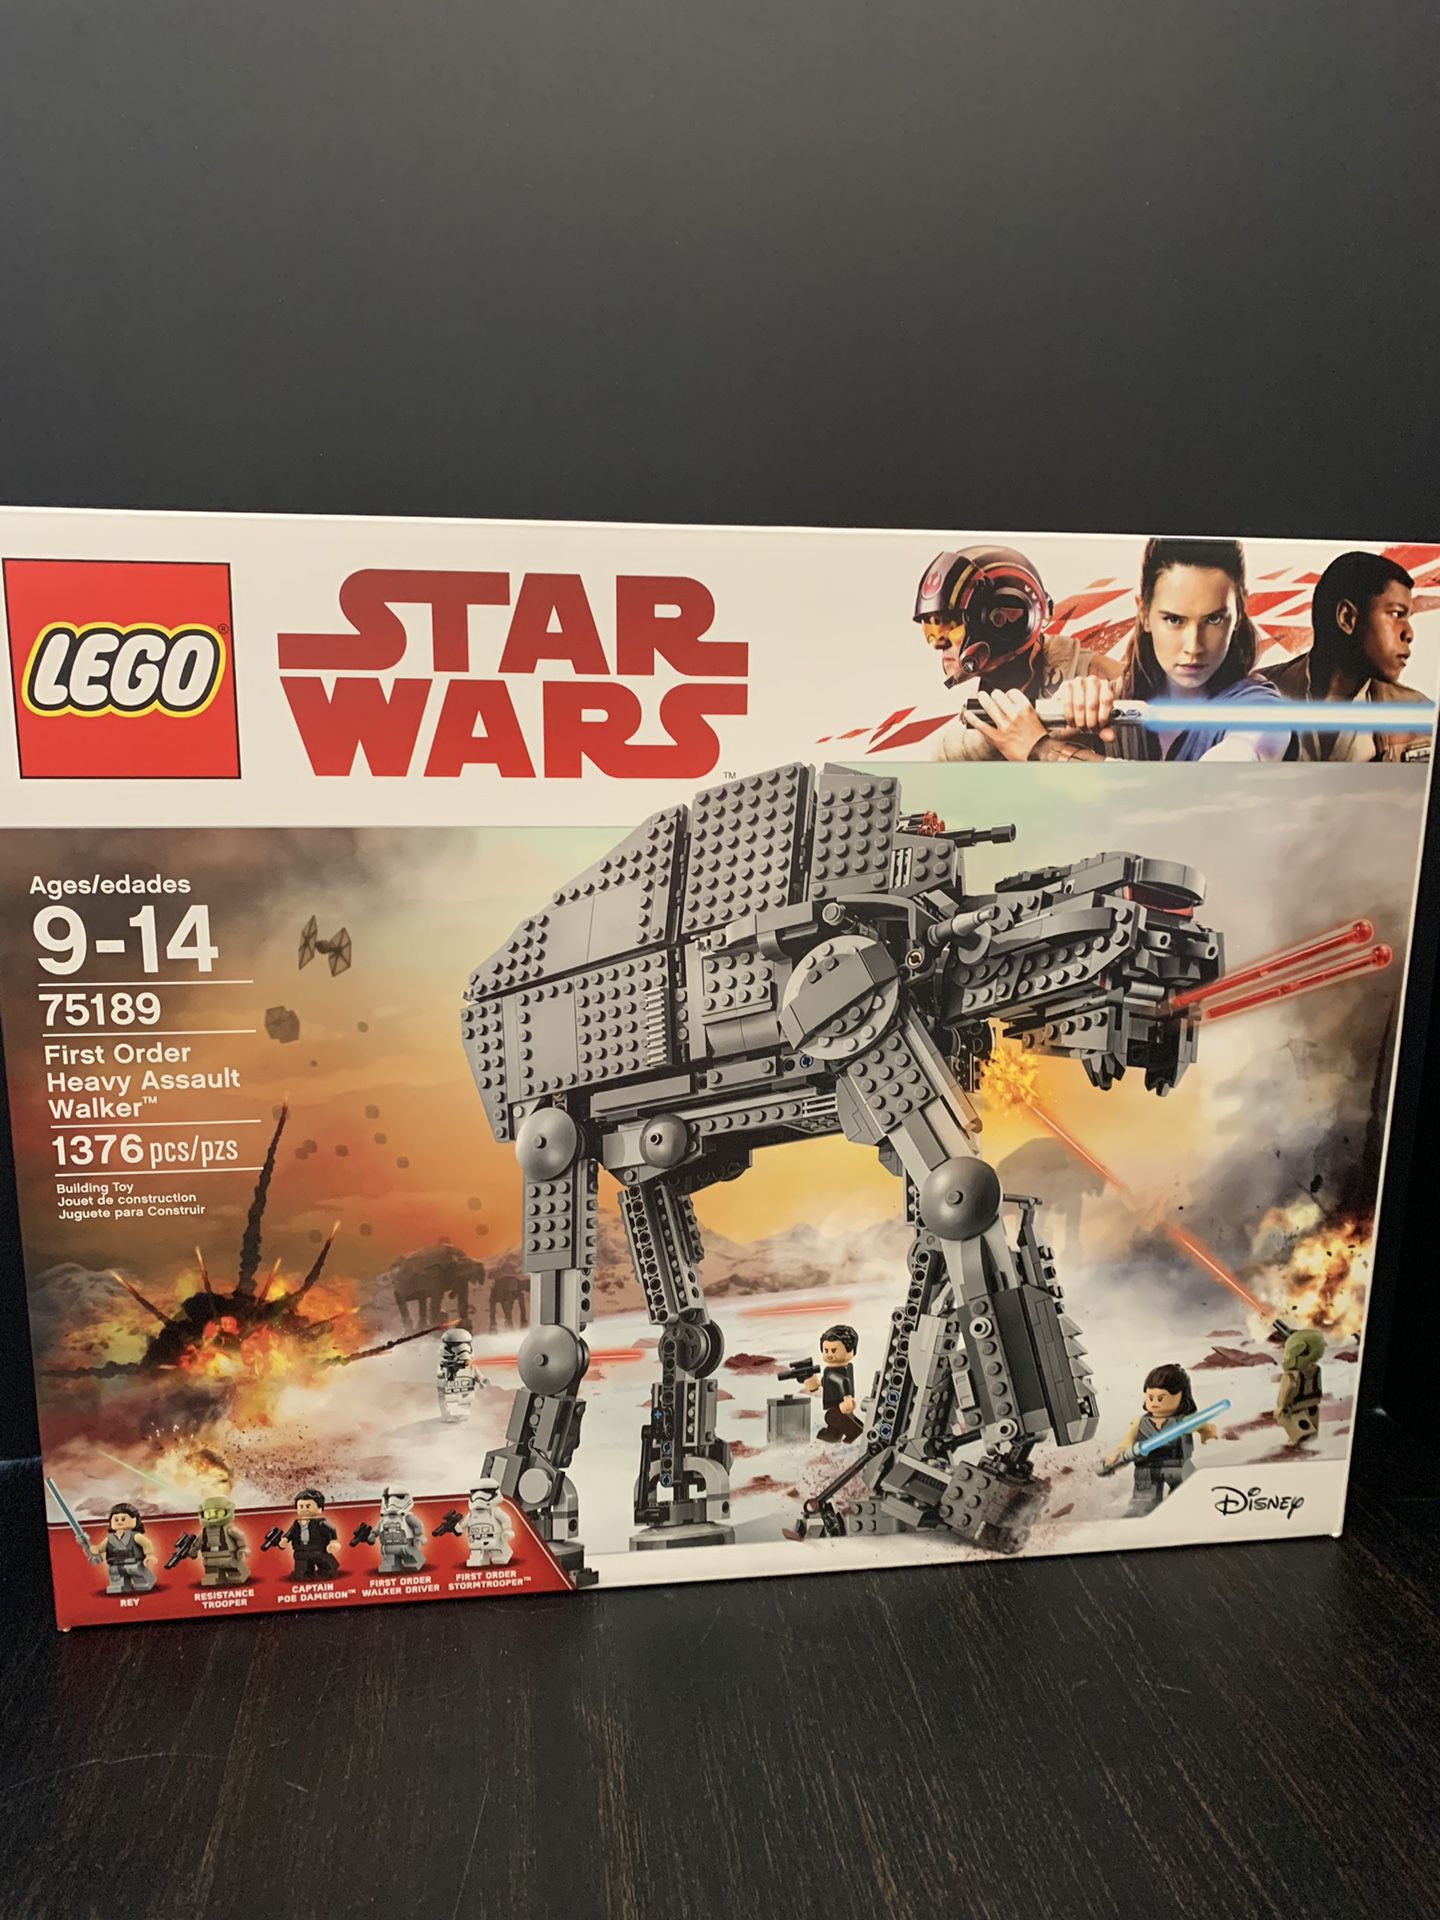 Star Wars LEGO First Order Heavy Assault Walker #75189 (Factory Sealed/Never Opened)2017